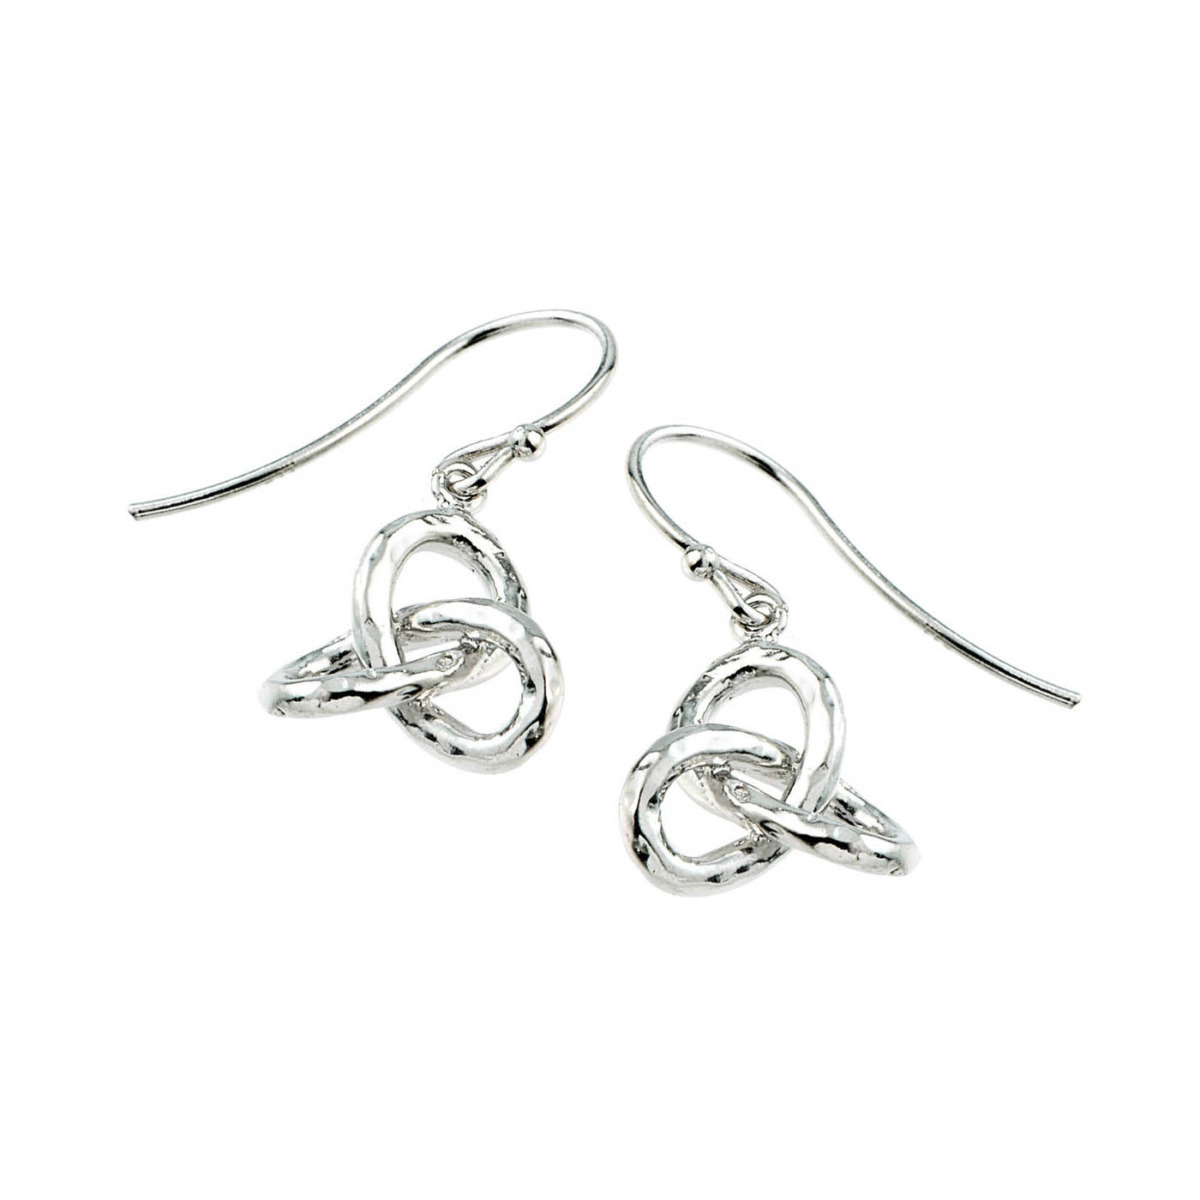 Men's Earrings in Silver from Gold Boutique GOOFASH